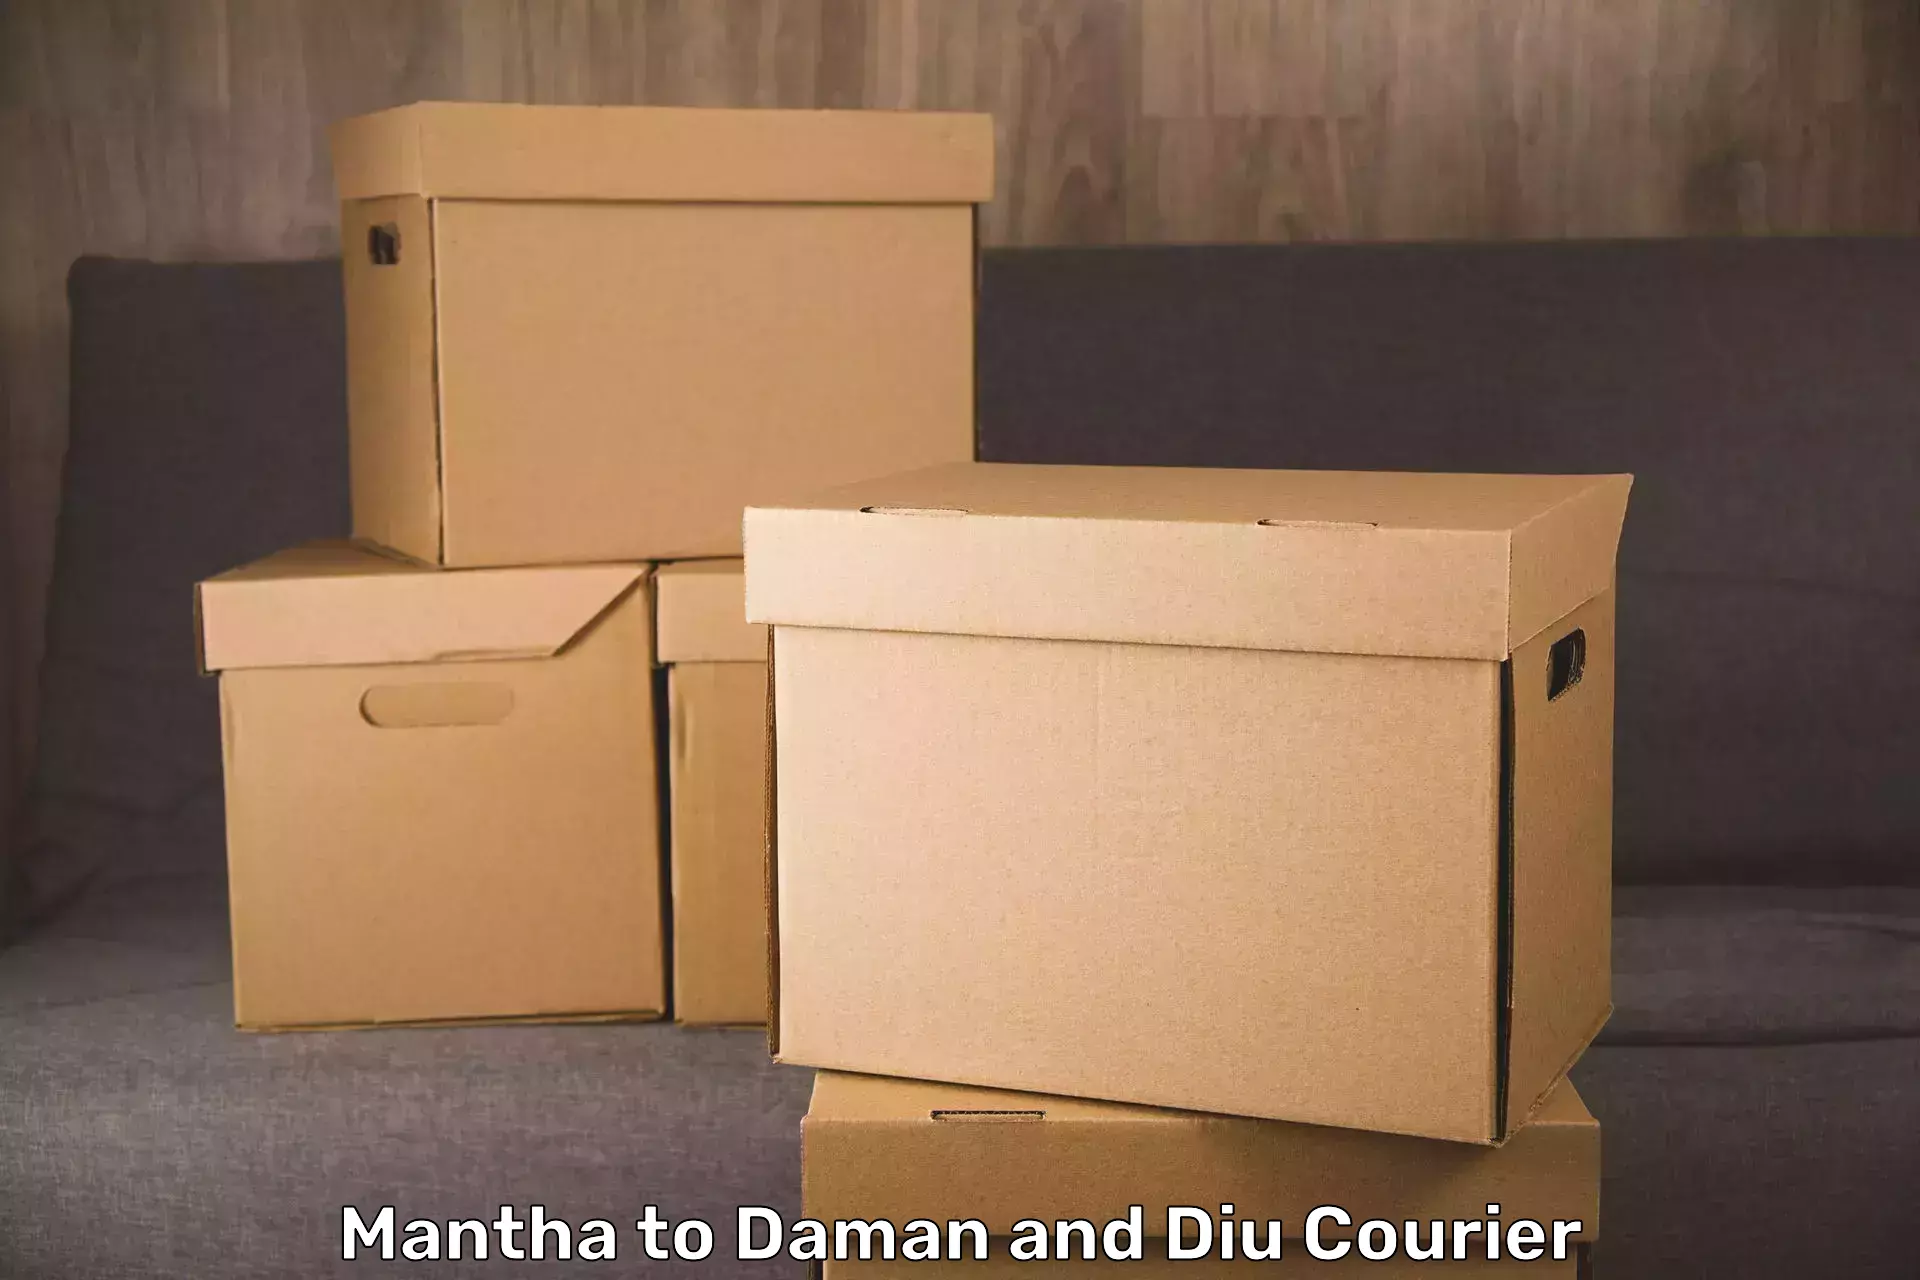 Luggage shipment specialists Mantha to Daman and Diu